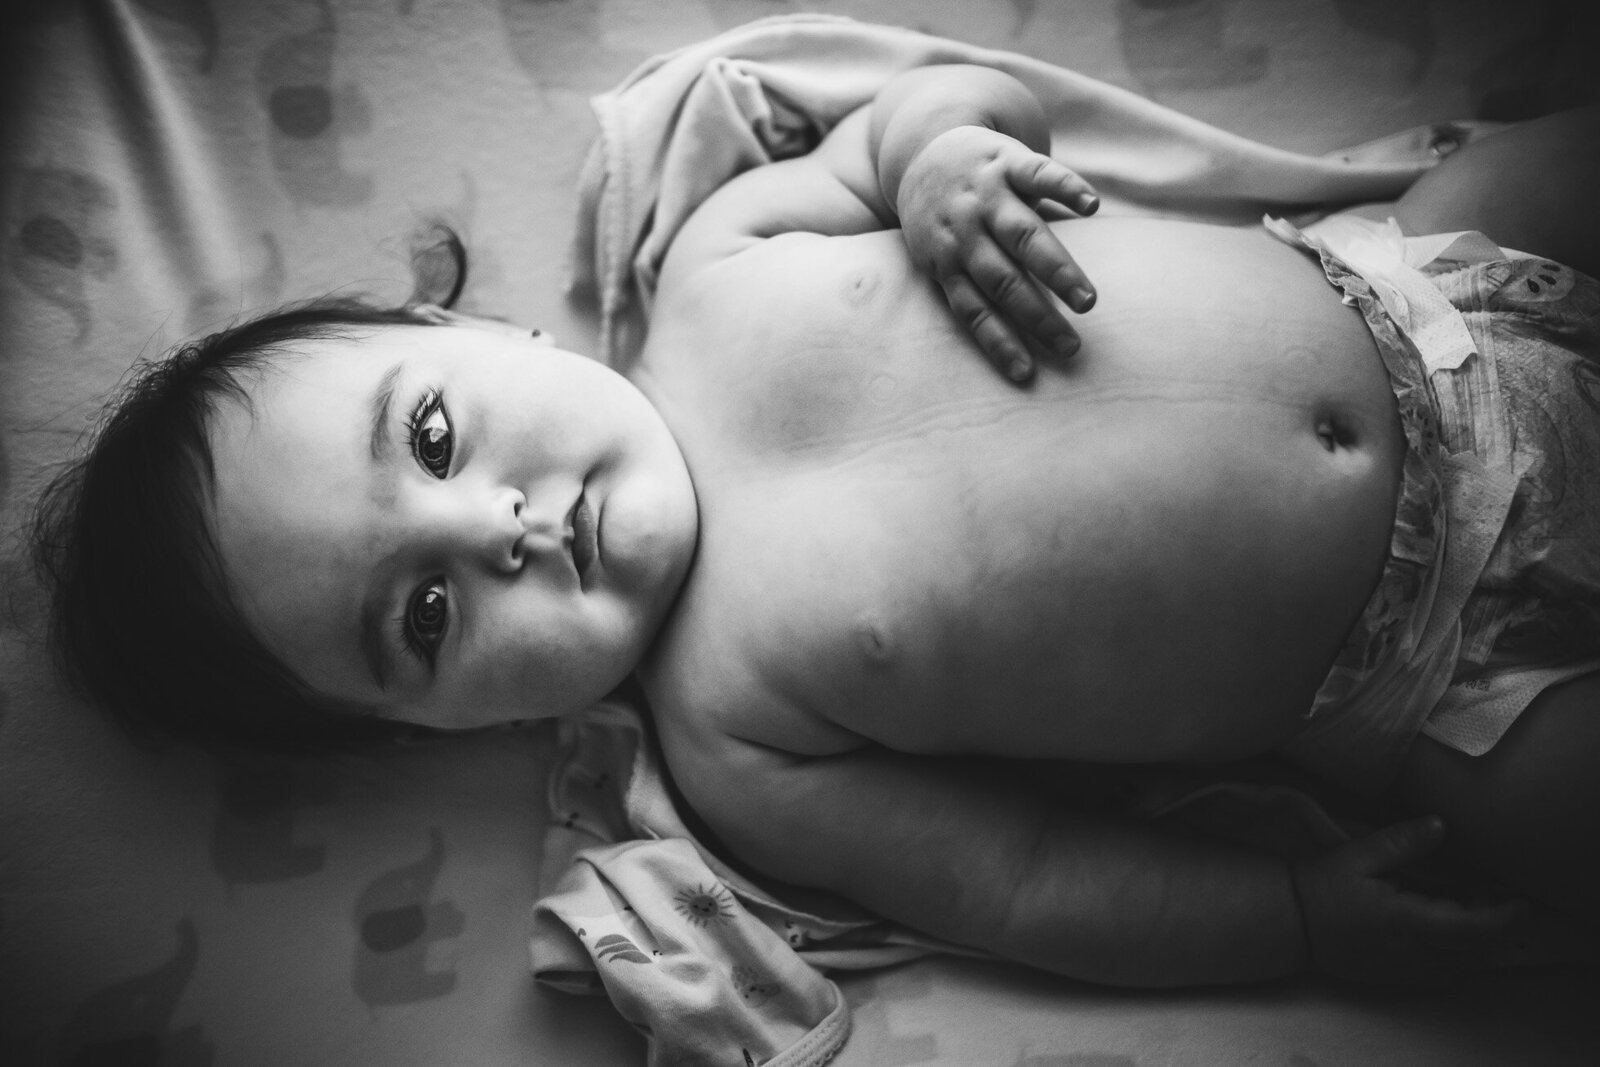 black & white image of baby on changing table